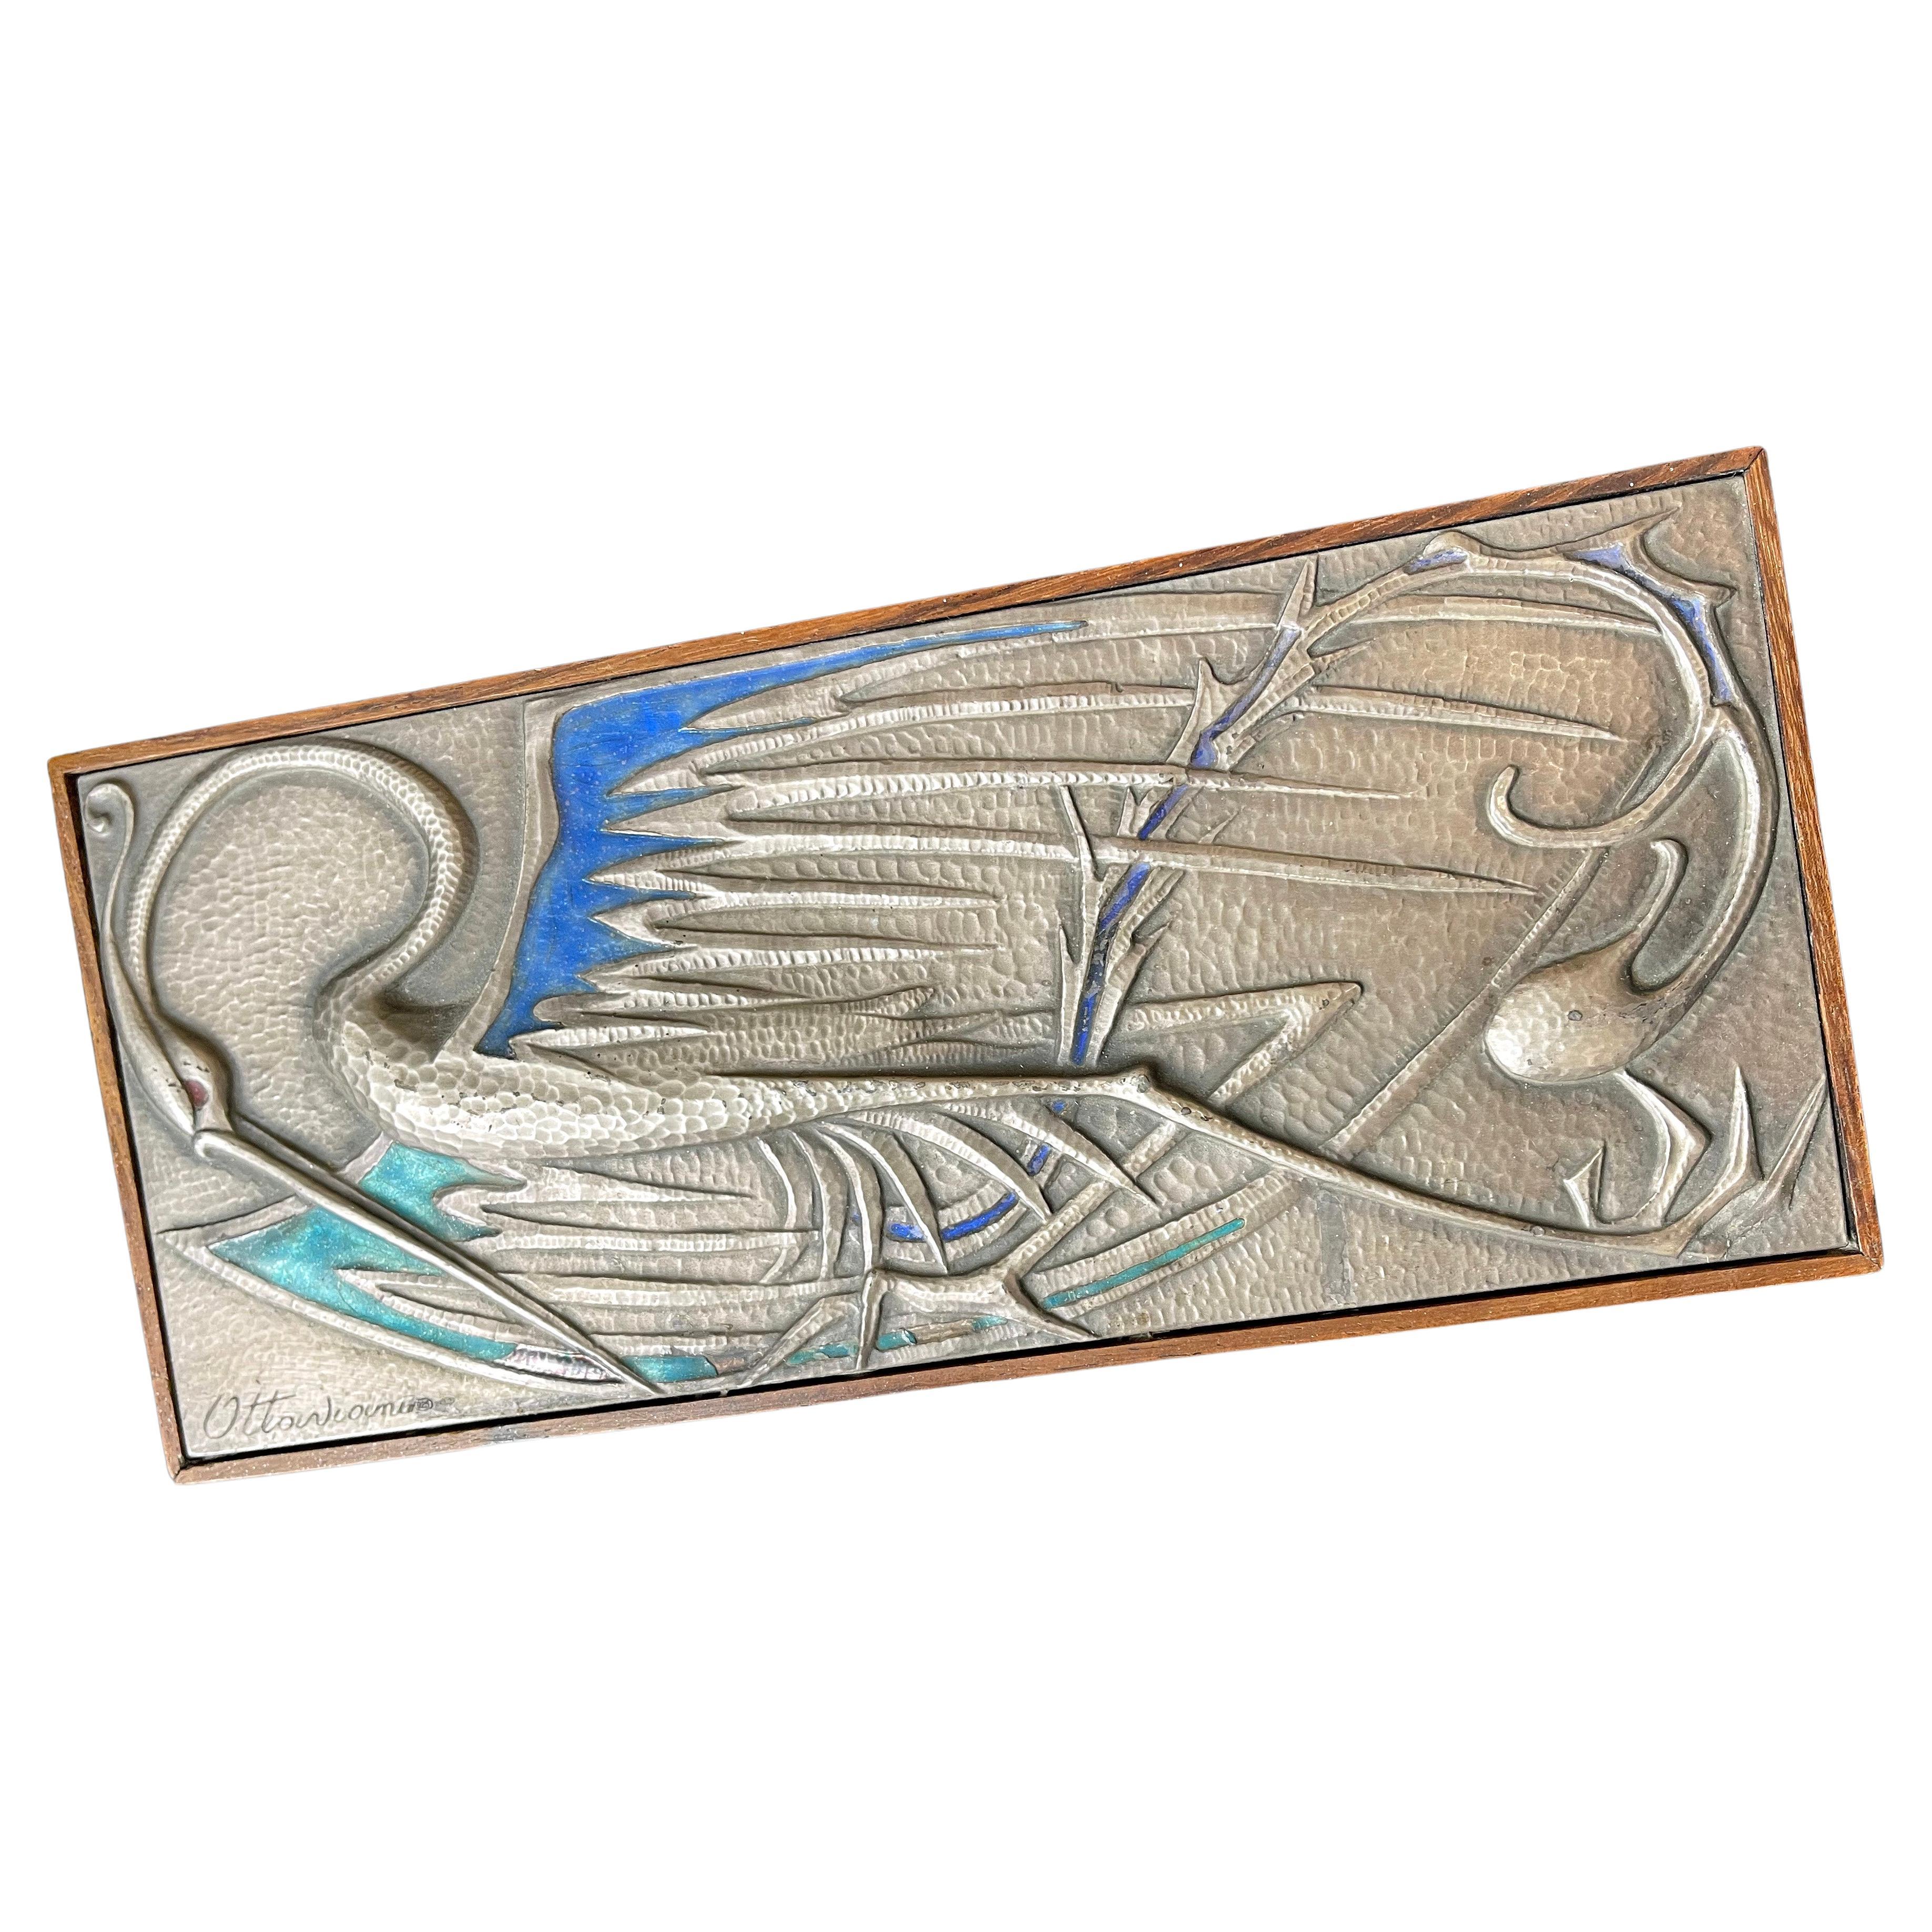 Beautifully crafted of hammered silver -- now with a soft, old silver patina -- enamel and rosewood, this exceptional decorative box depicts a wildly imaginative crane-like bird with blue and green plumage, its wings outspread and its long, narrow